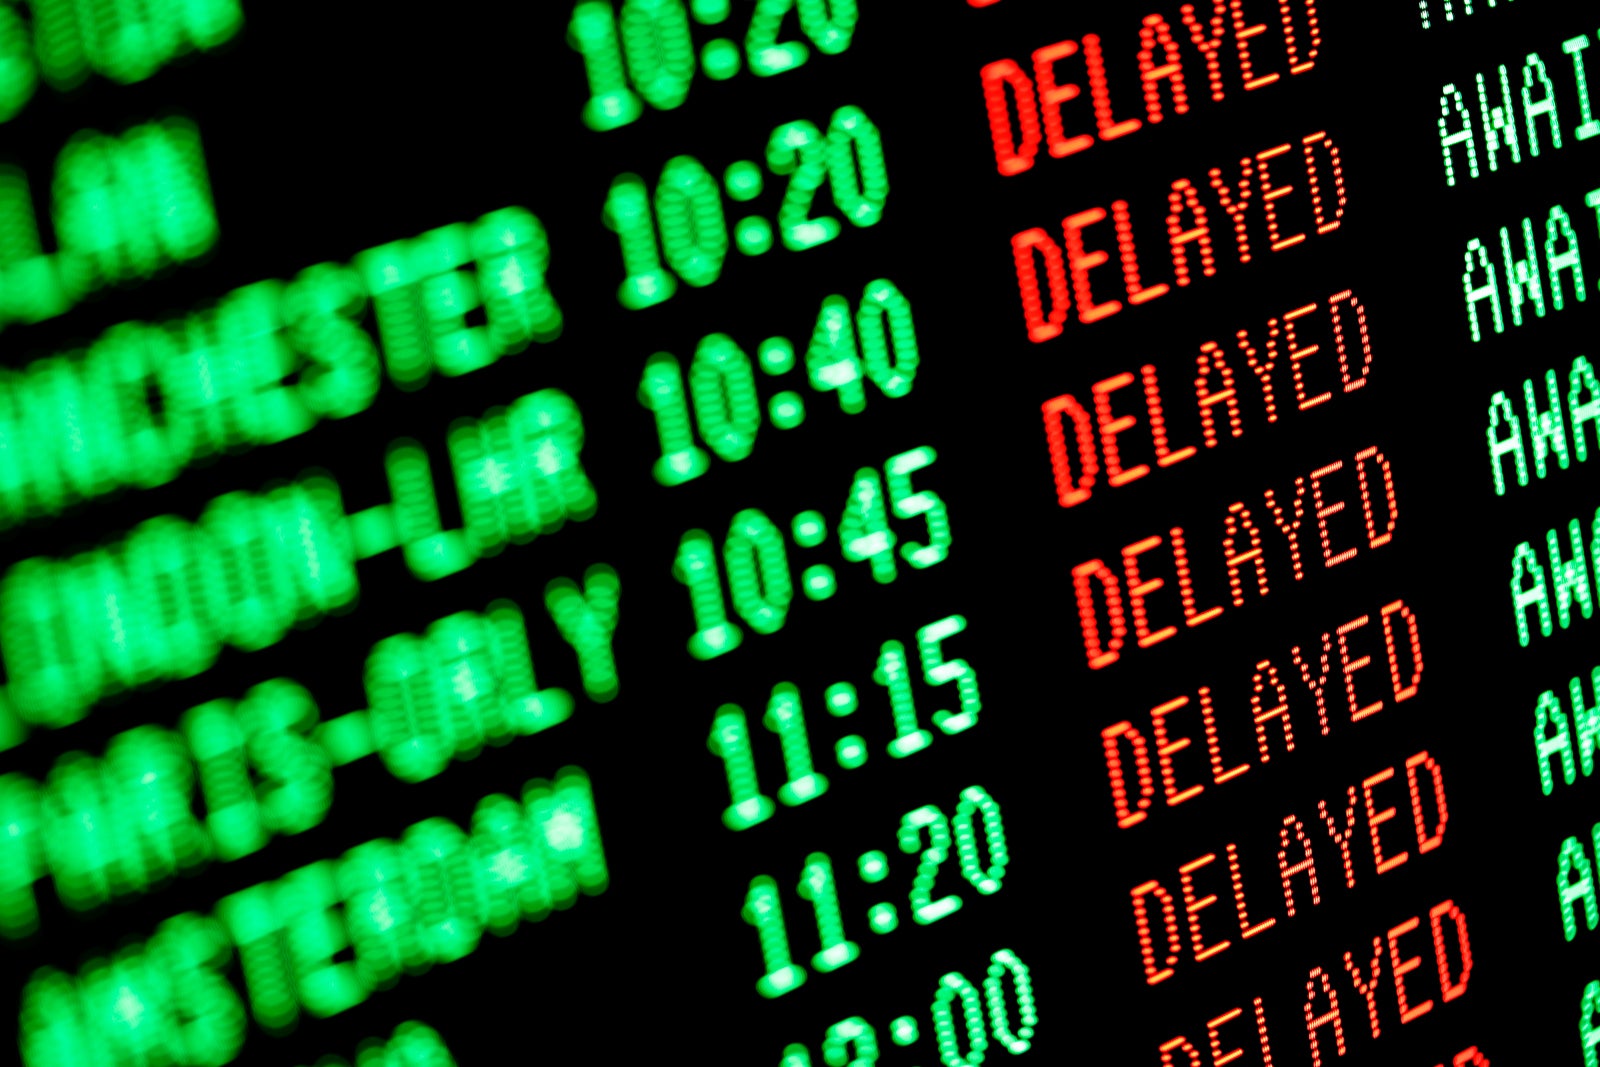 Flight delayed? Remember these 4 things if you want trip delay reimbursement